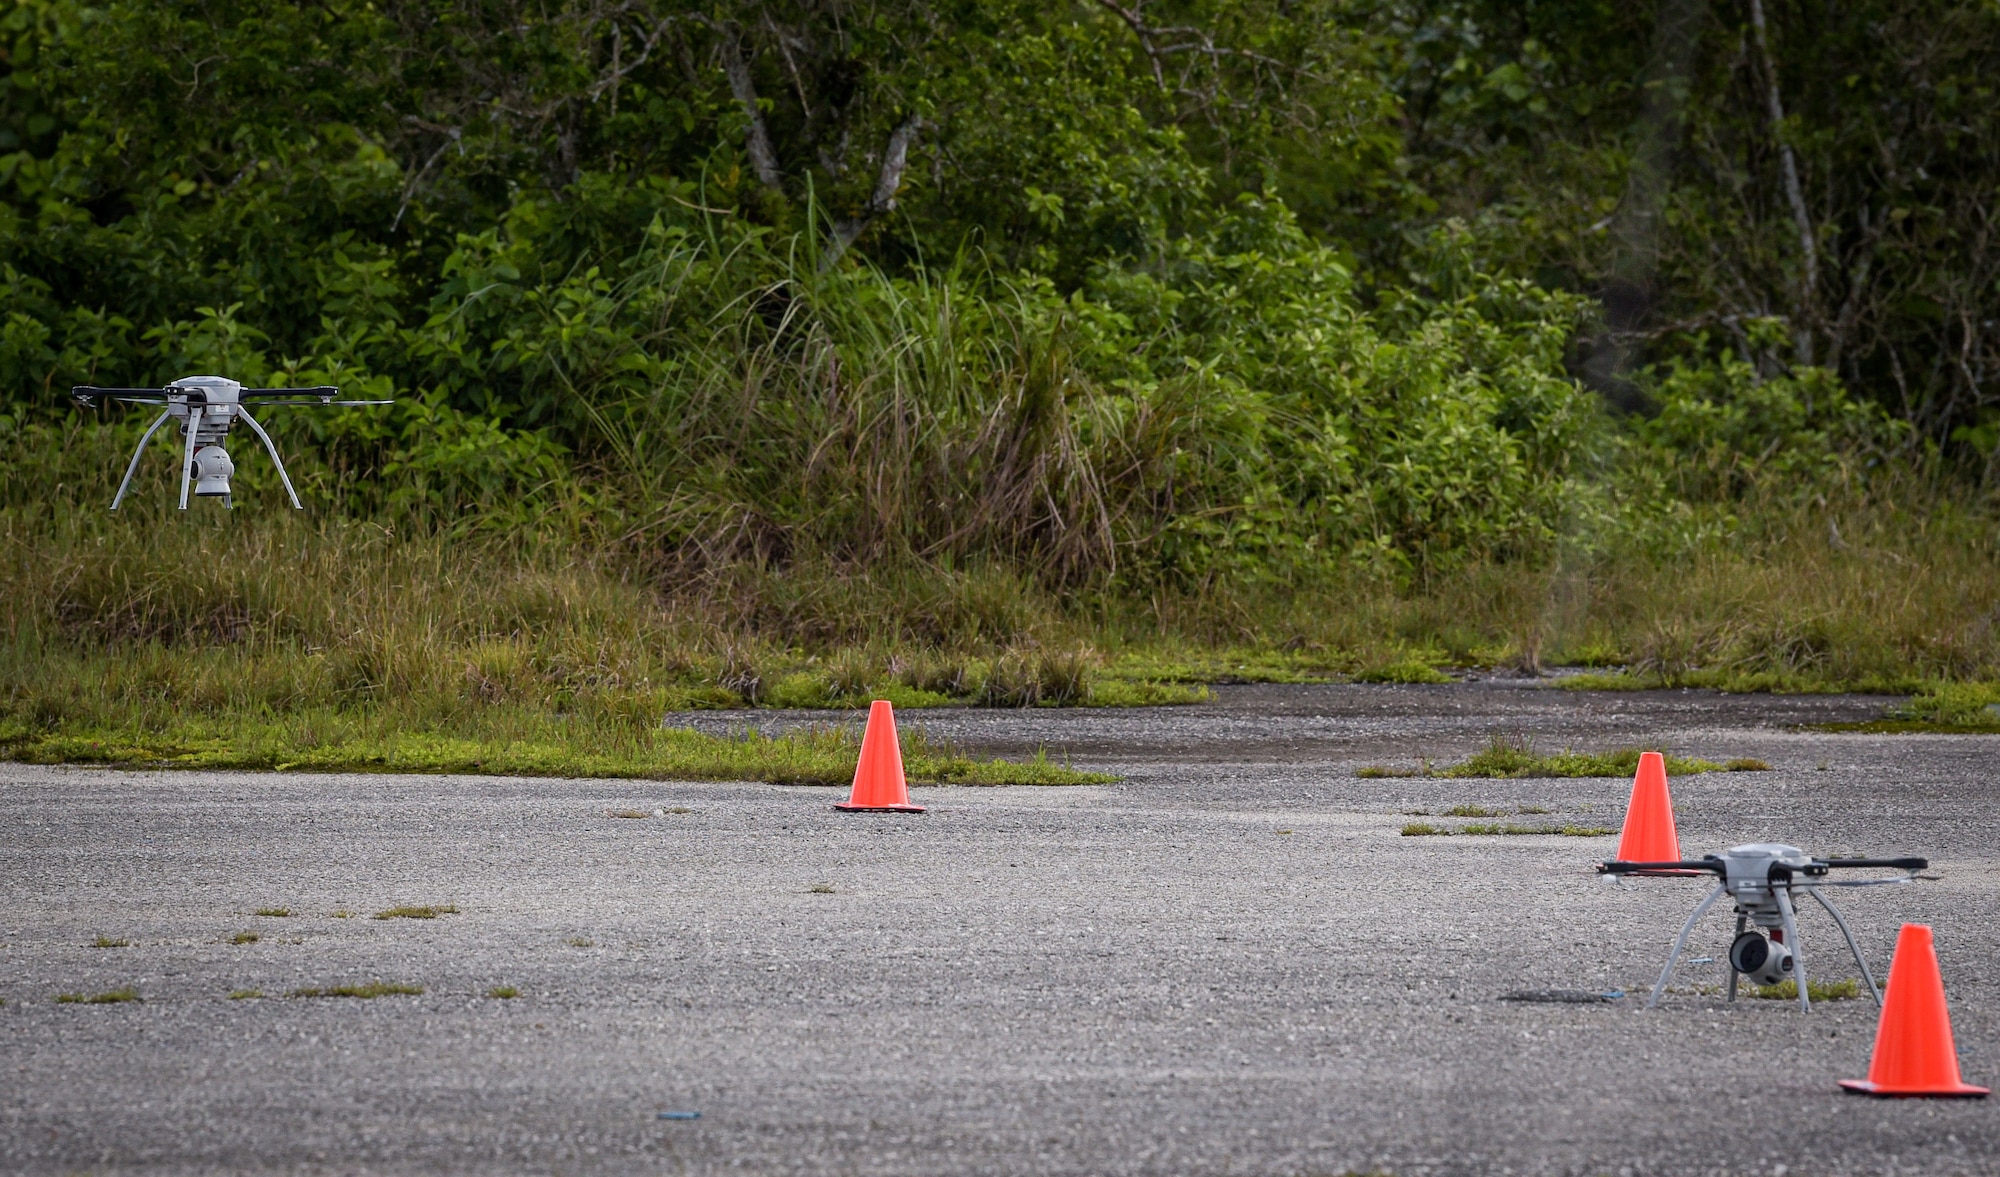 U.S. Air Force civil engineers fly a Small Unmanned Aircraft System during Rapid Airfield Damage Assessment System testing at Andersen Air Force Base, Guam, Nov. 5, 2021.